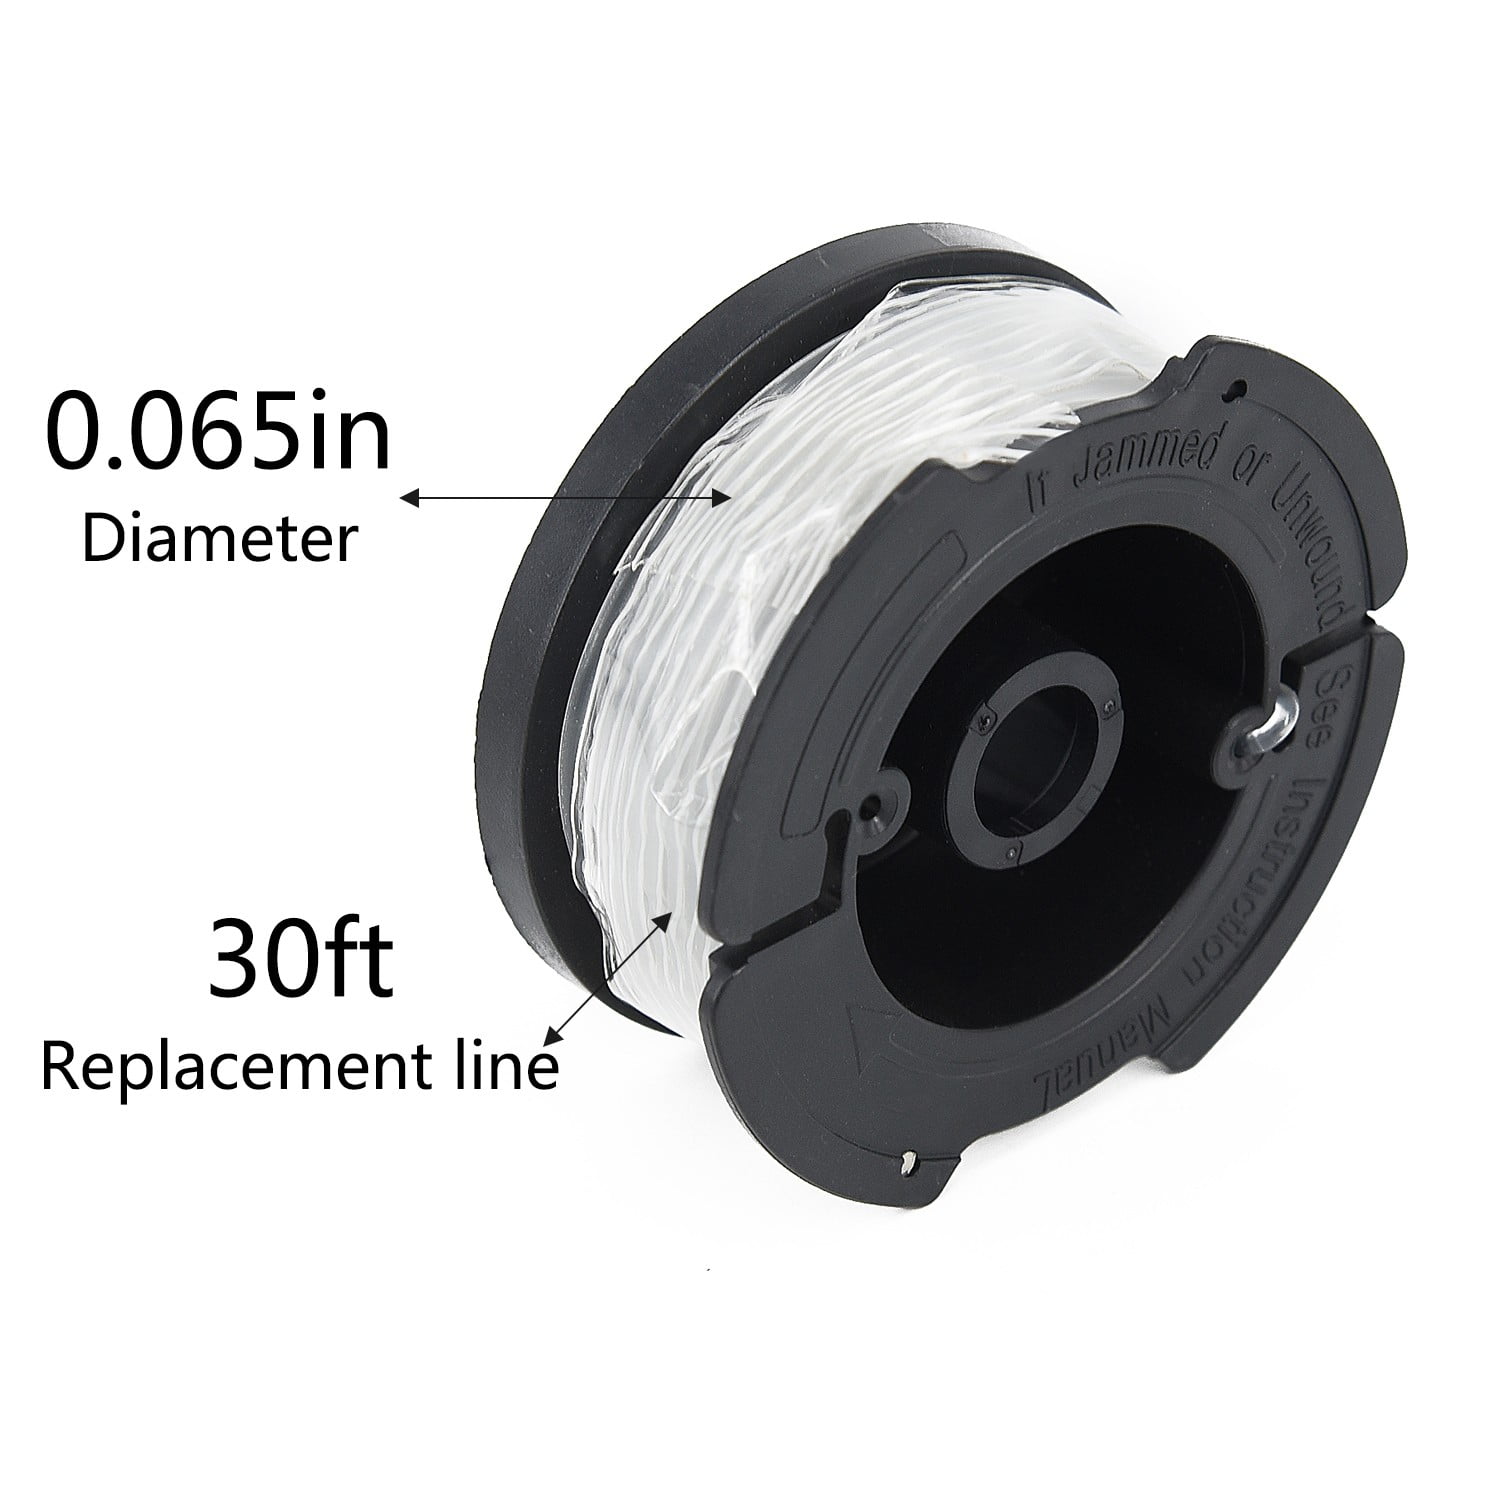  KAKO AF100 Replacement Spool for Black and Decker Weed Eater  Spool, 0.065 30ft Trimmer Line for Black & Decker Weed Eater String, for  Black and Decker String Trimmer Replacement Spool(16+3+3